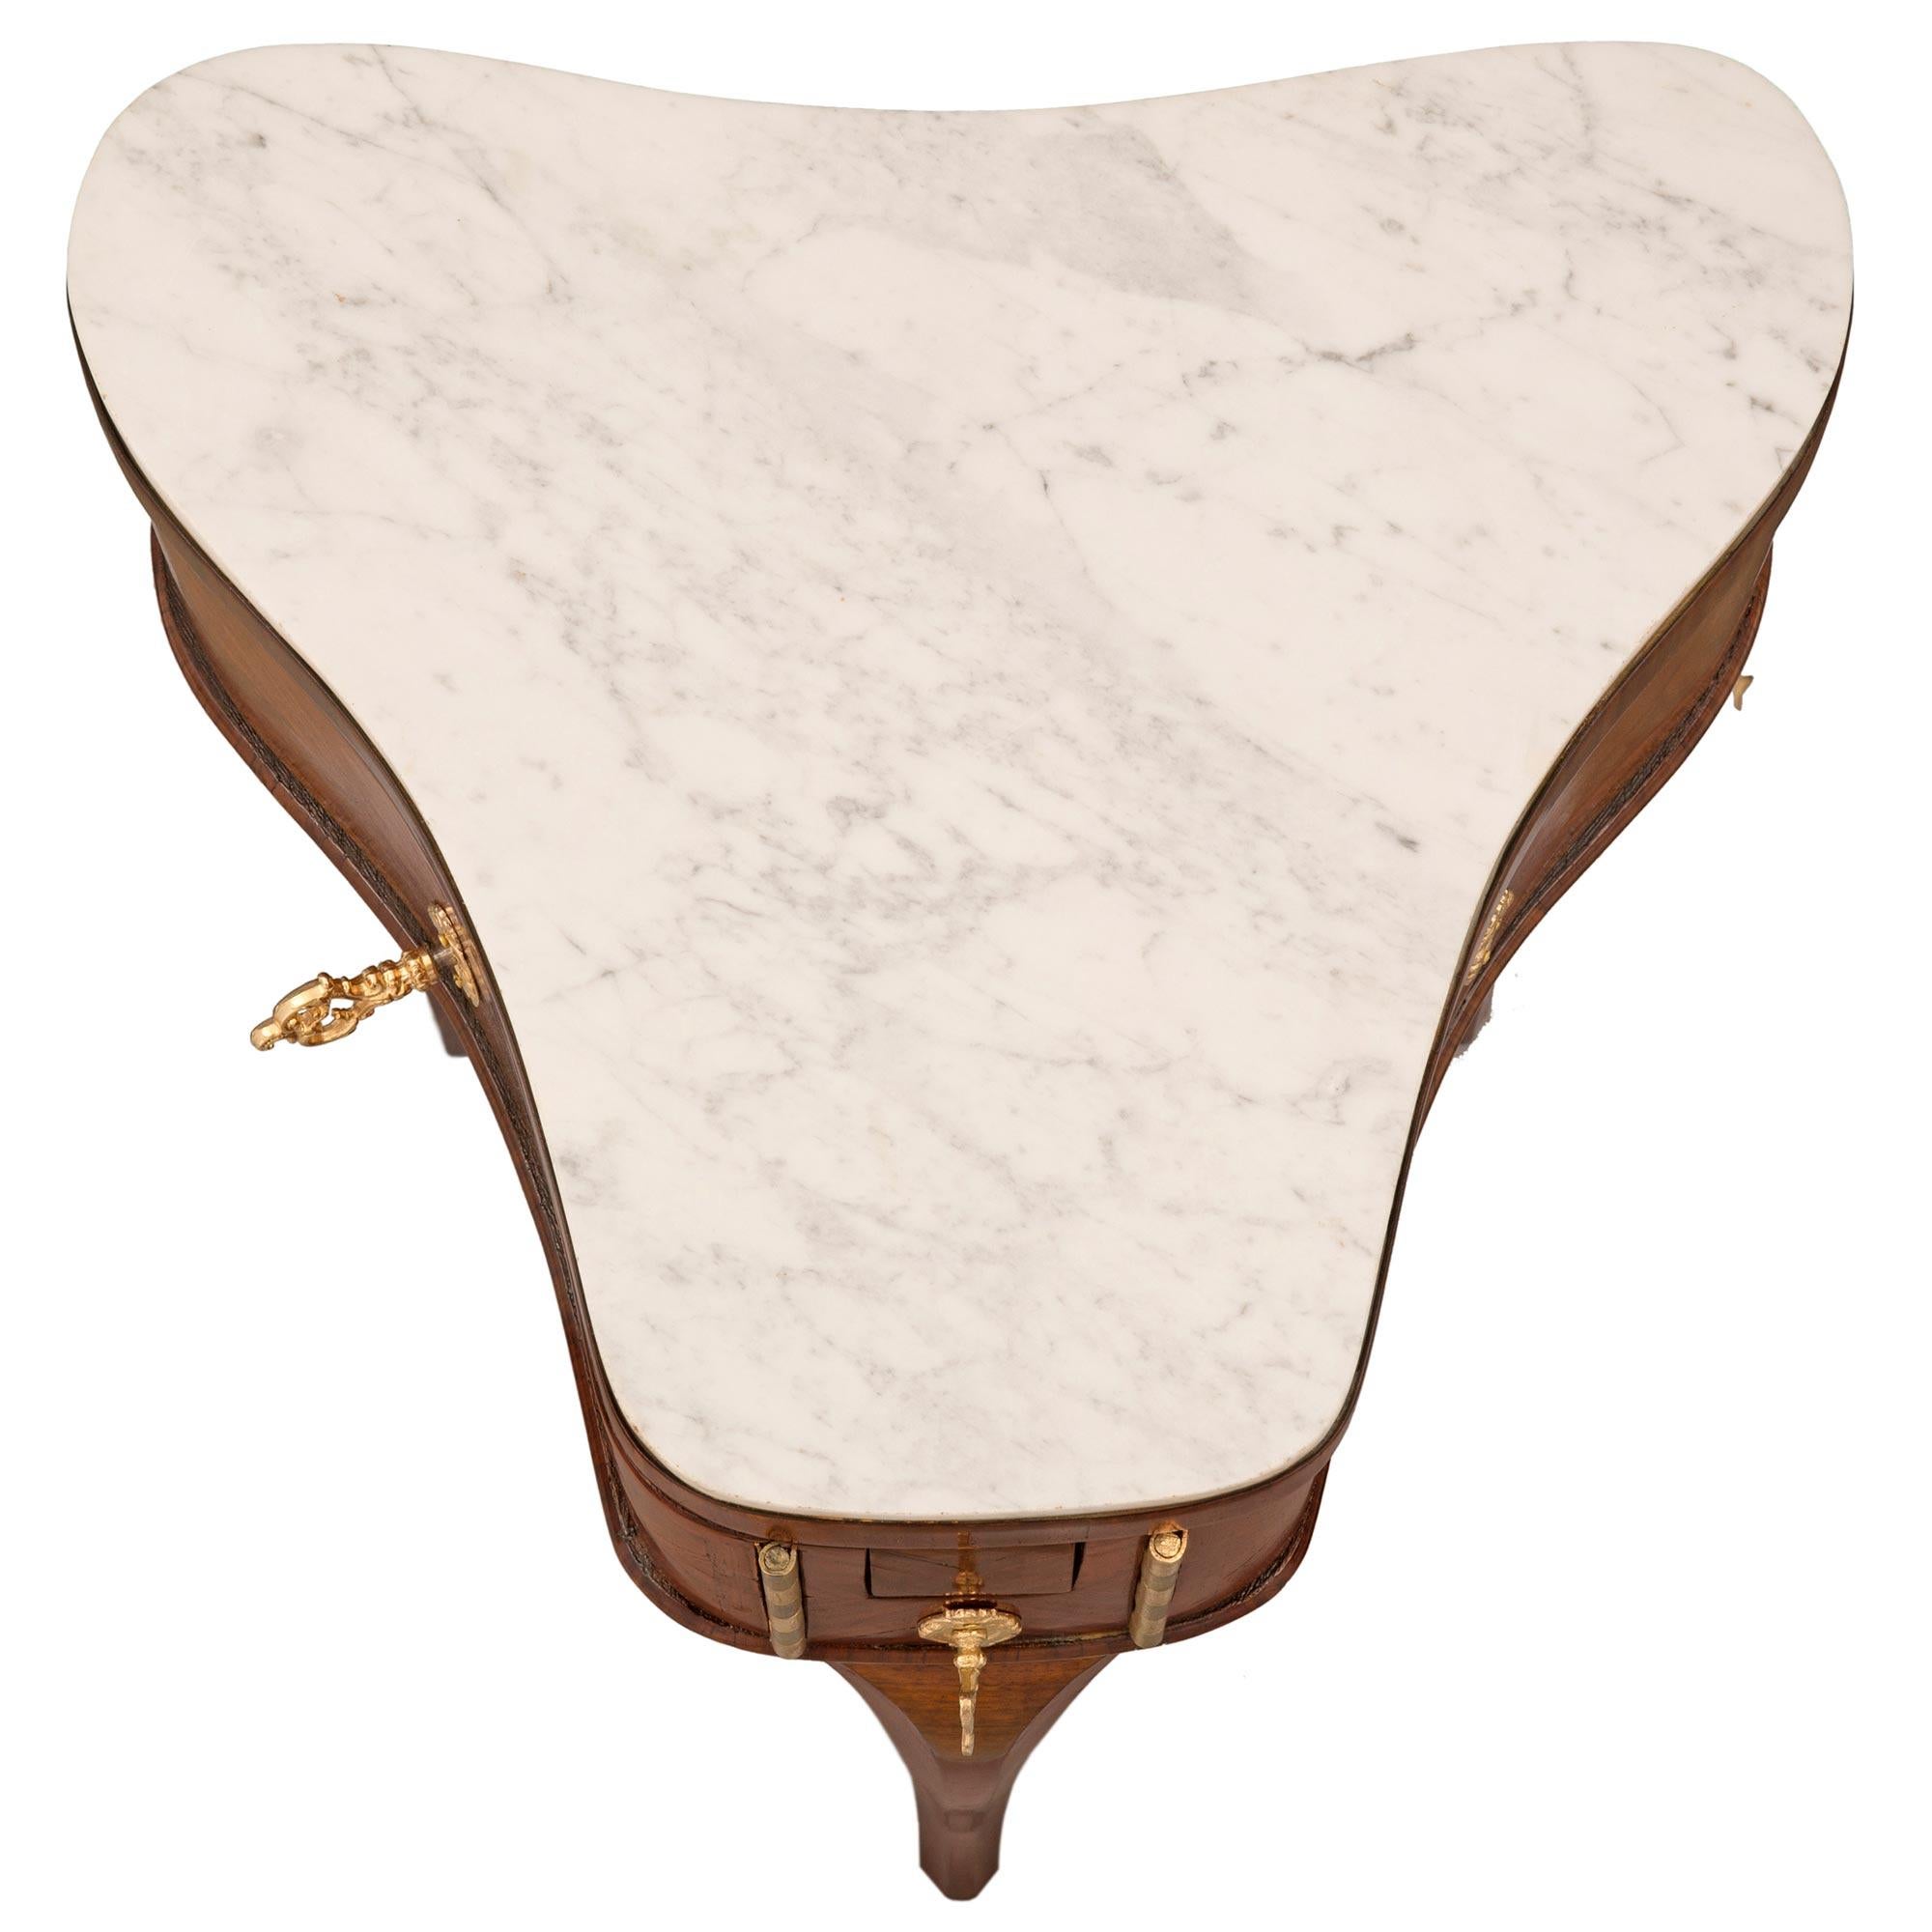 A unique and extremely decorative French 18th century Louis XV period kingwood and white Carrara marble side table. The clover shaped table is raised by three elegant tapered cabriole legs with most decorative cut designs at the front. The apron